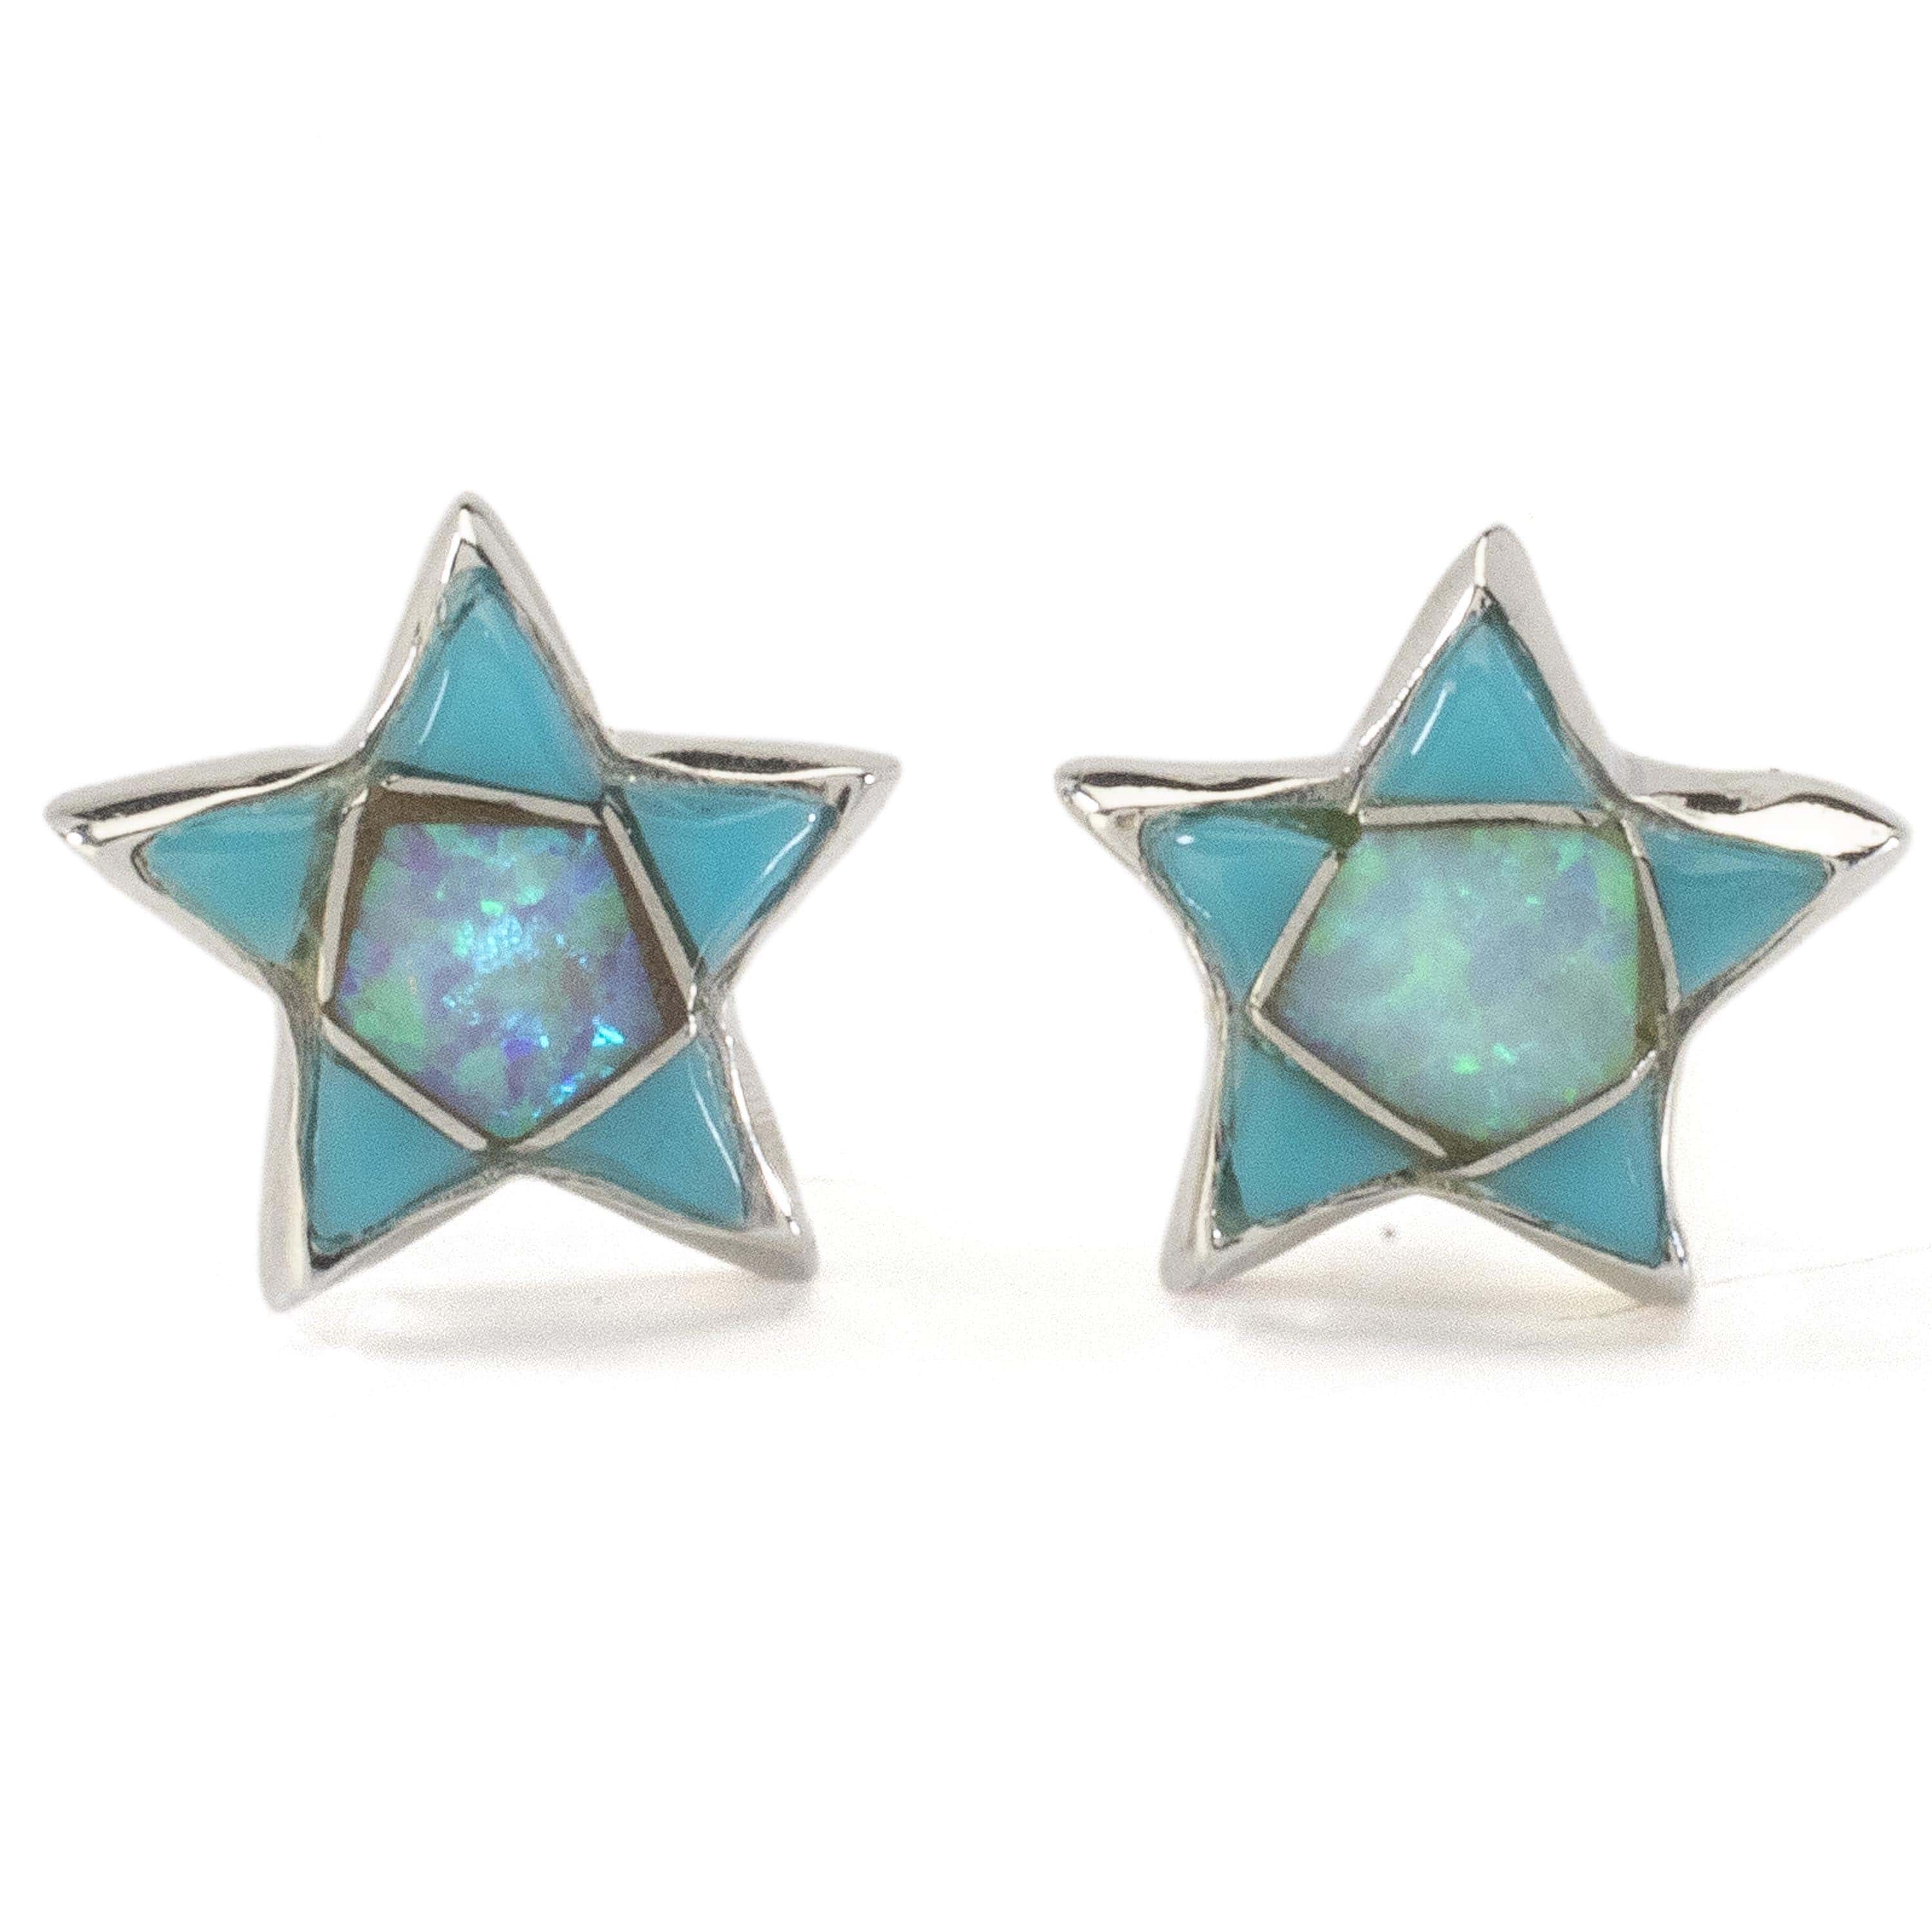 Kalifano Southwest Silver Jewelry Turquoise and Opal Star Earrings Handmade with Sterling Silver and Opal Accent NME.2243.TQ